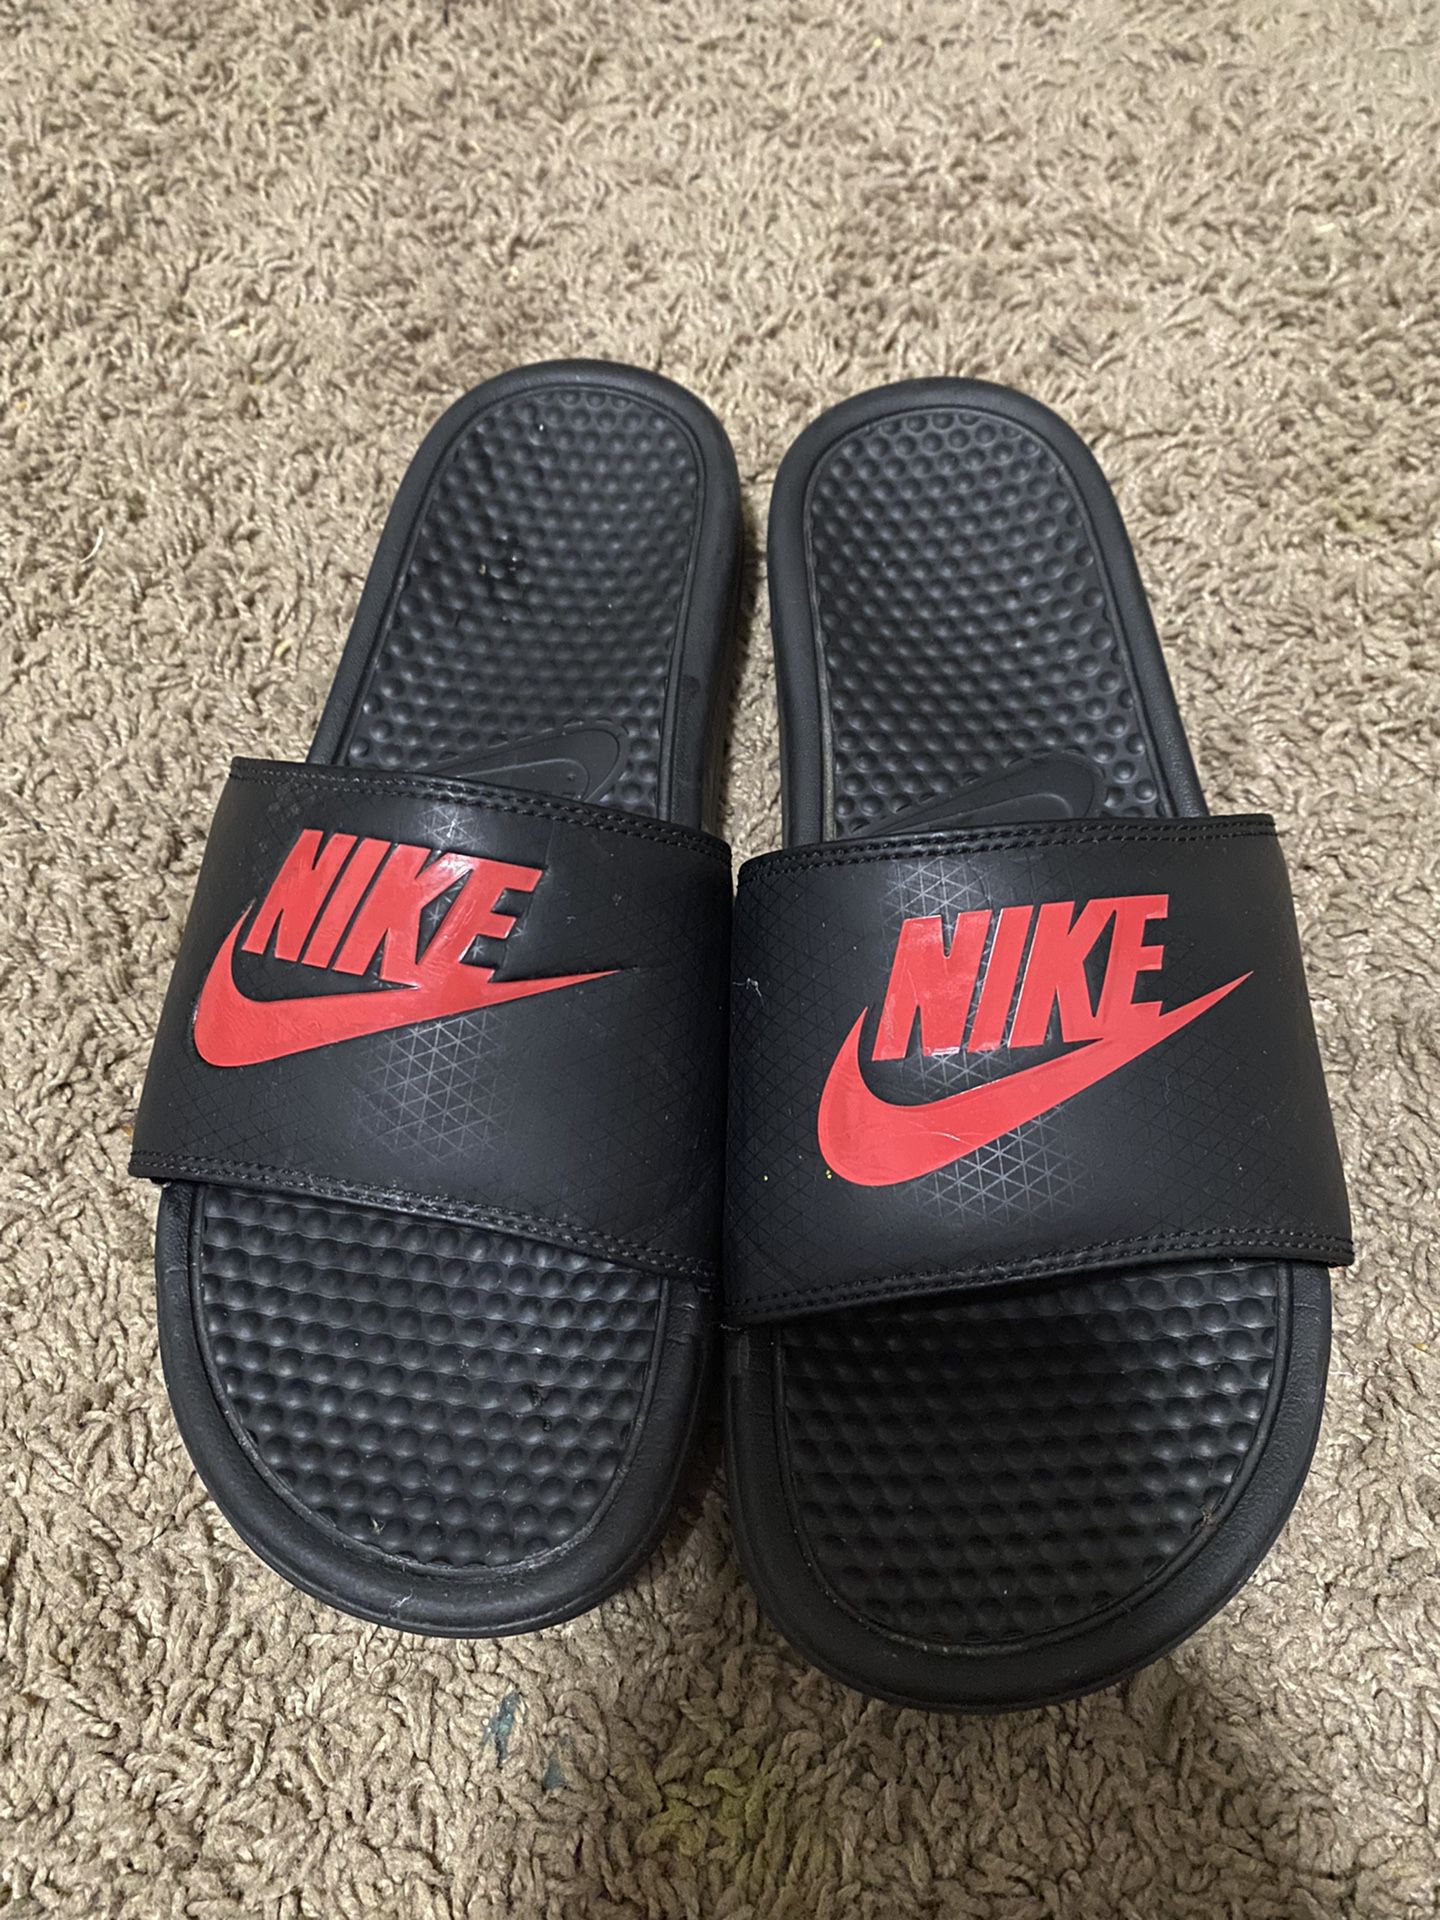 Escupir torneo cielo Black And Red Nike Slides for Sale in Tacoma, WA - OfferUp